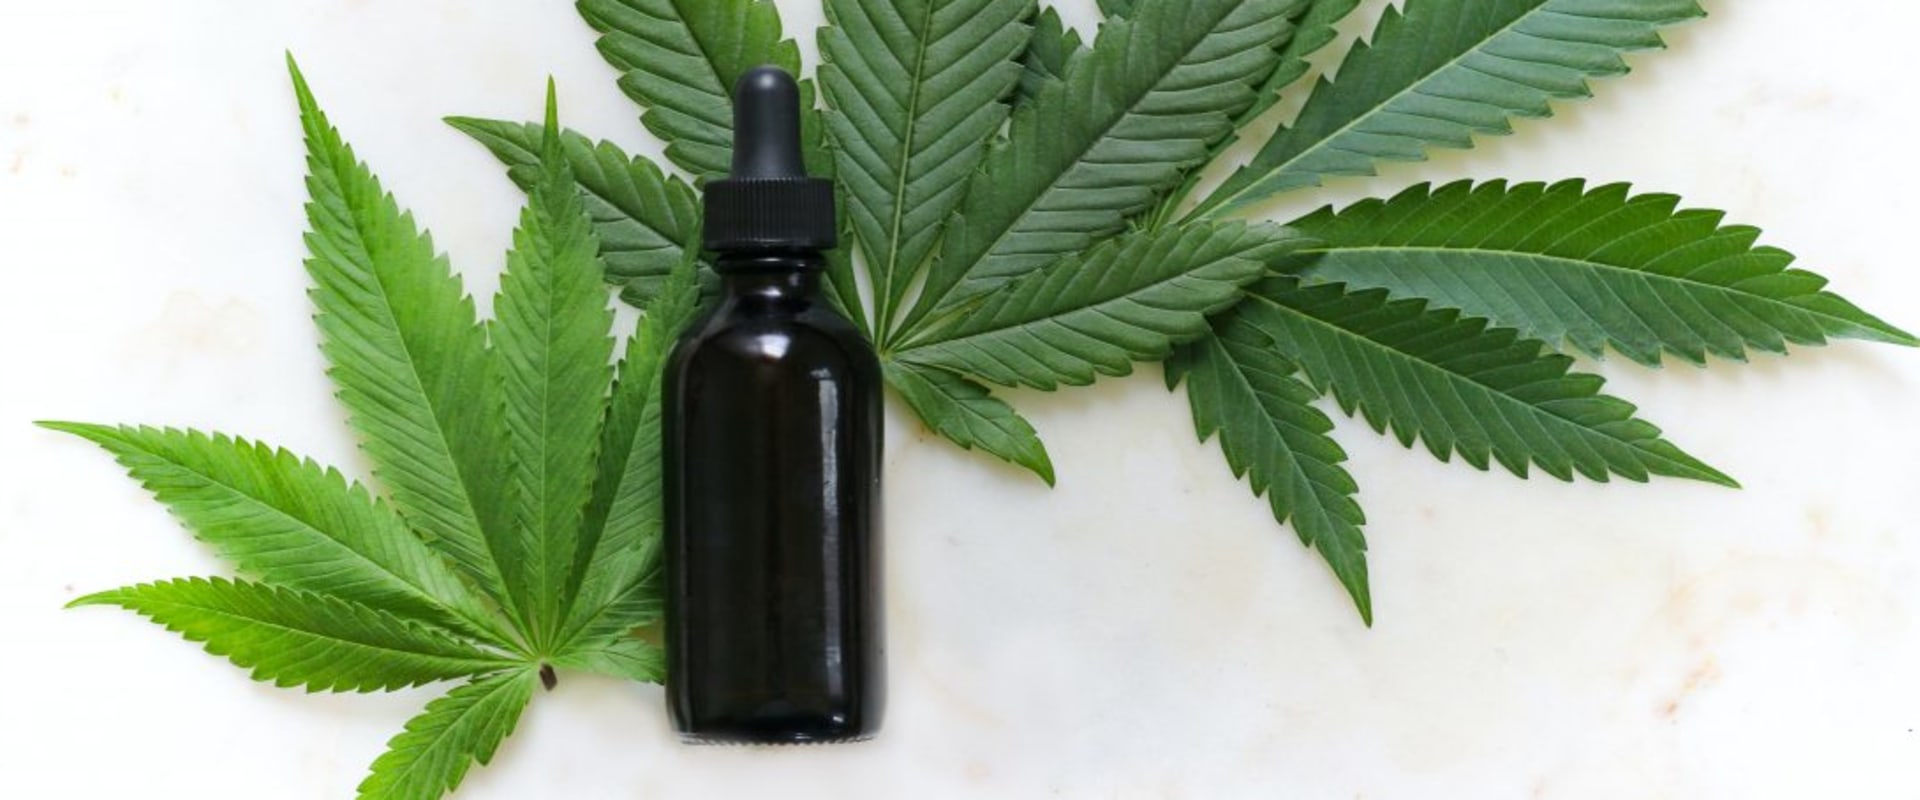 What are the negative side effects of thc tincture?